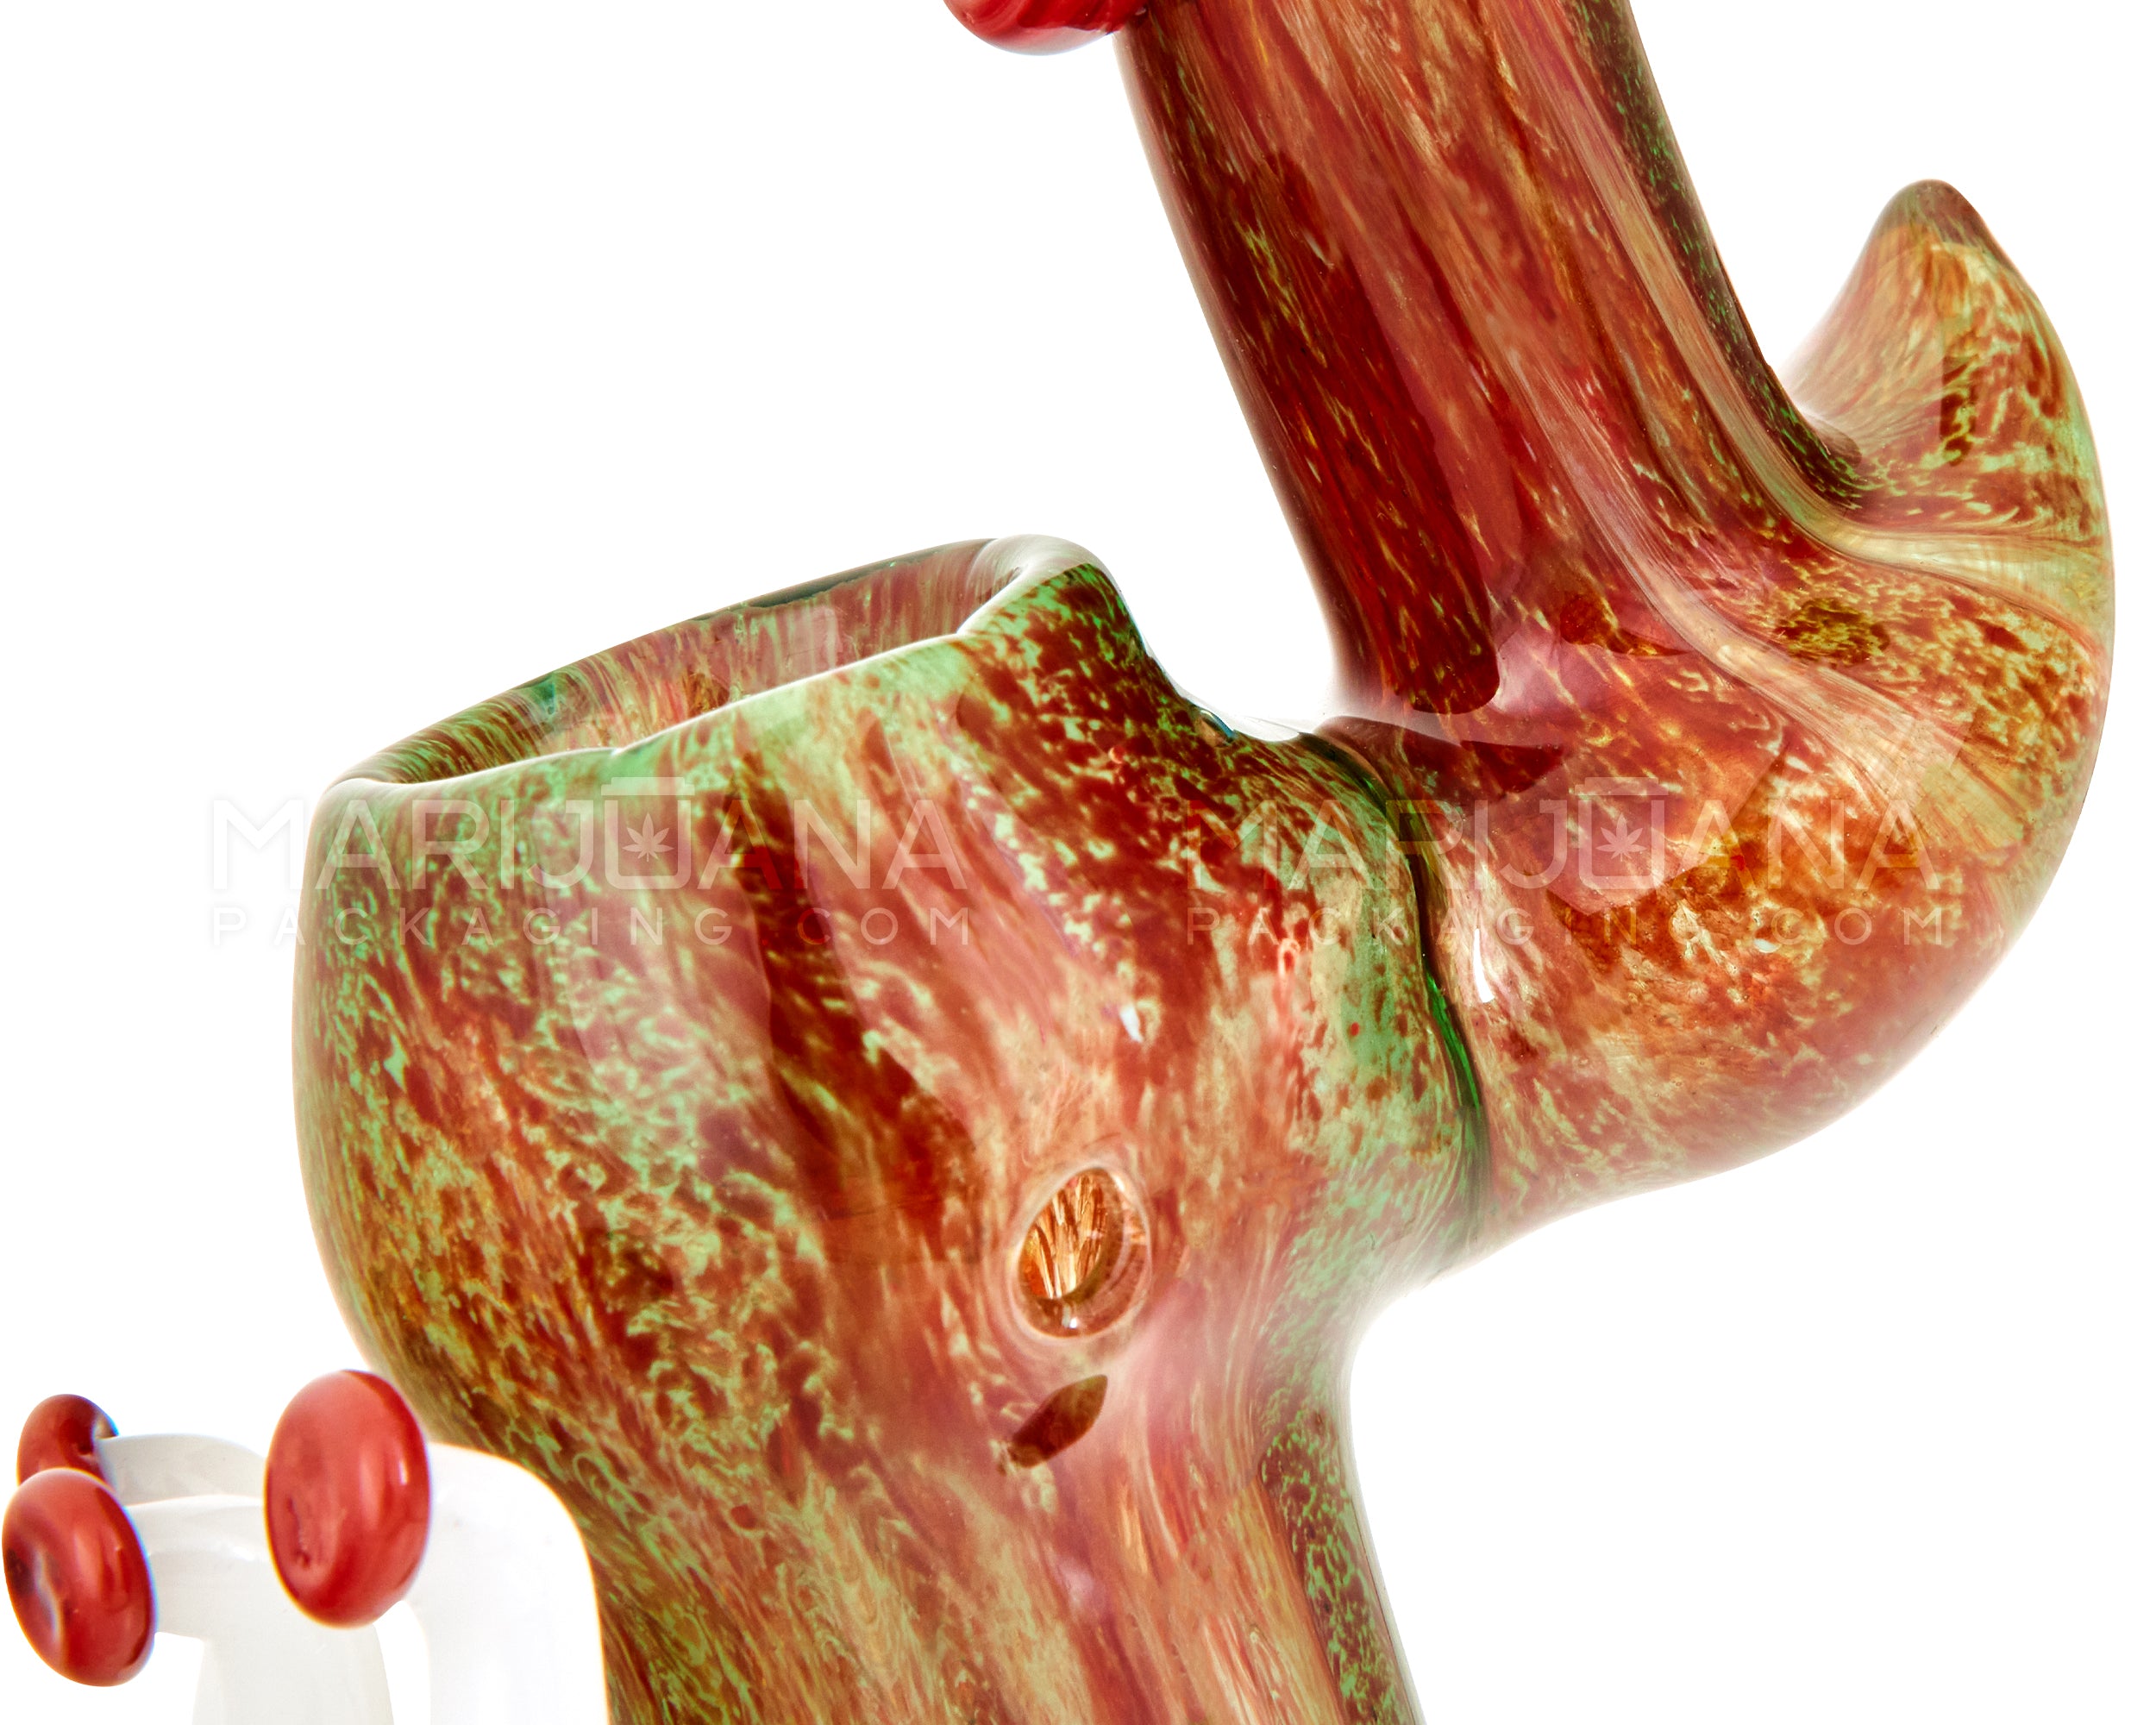 Heady | Donut Mouth Color Pull Kraken Bubbler w/ Triple Tentacles | 9in Tall - Glass - Red & Green - 8